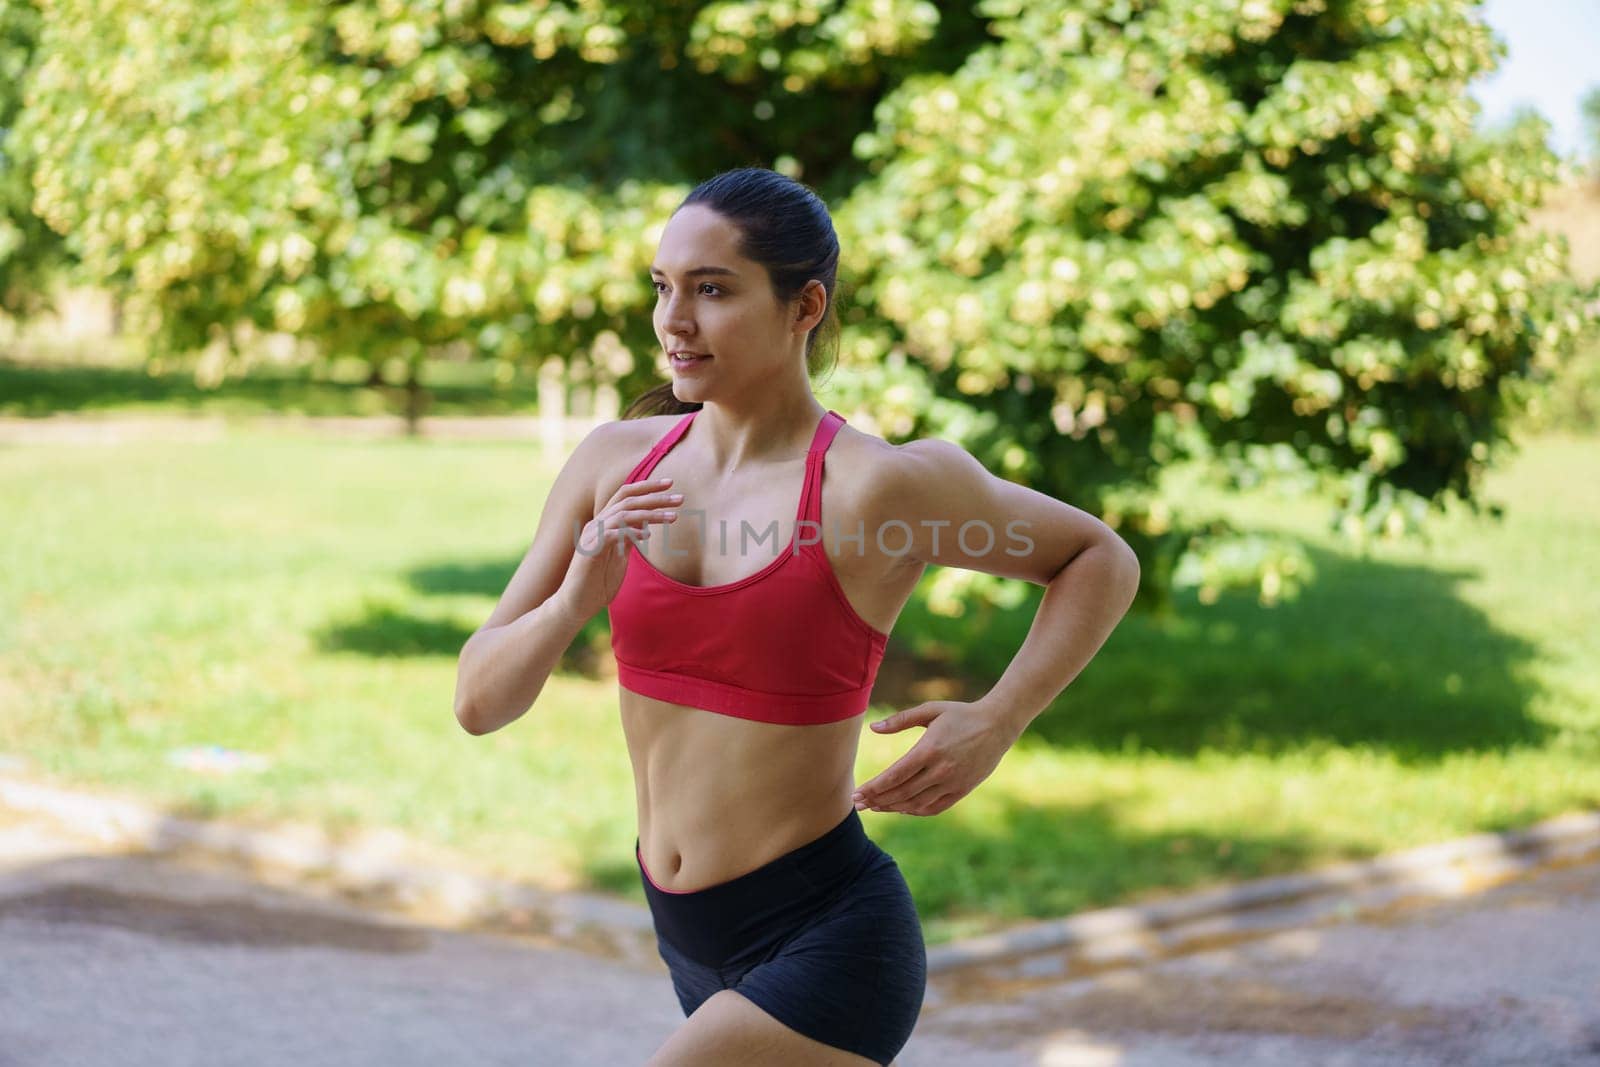 A young woman in red sports bra and black shorts is jogging in a green park on a sunny day, promoting fitness and a healthy lifestyle, embodying keywords like active, exercise, health, and wellness